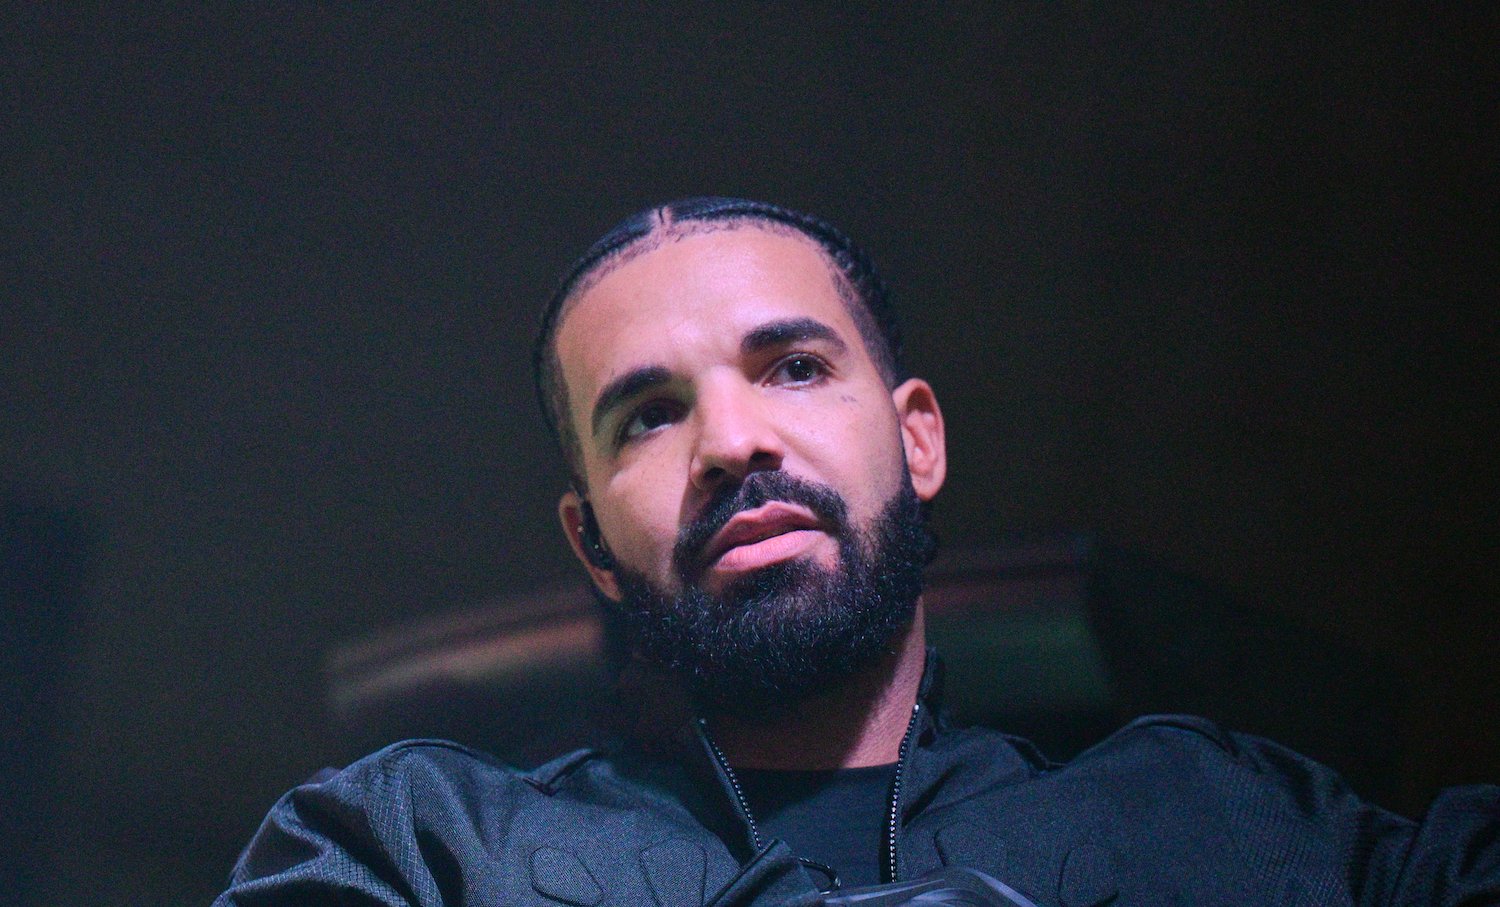 Drake, who released his album 'Her Loss' in November 2022, photographed wearing a black shirt